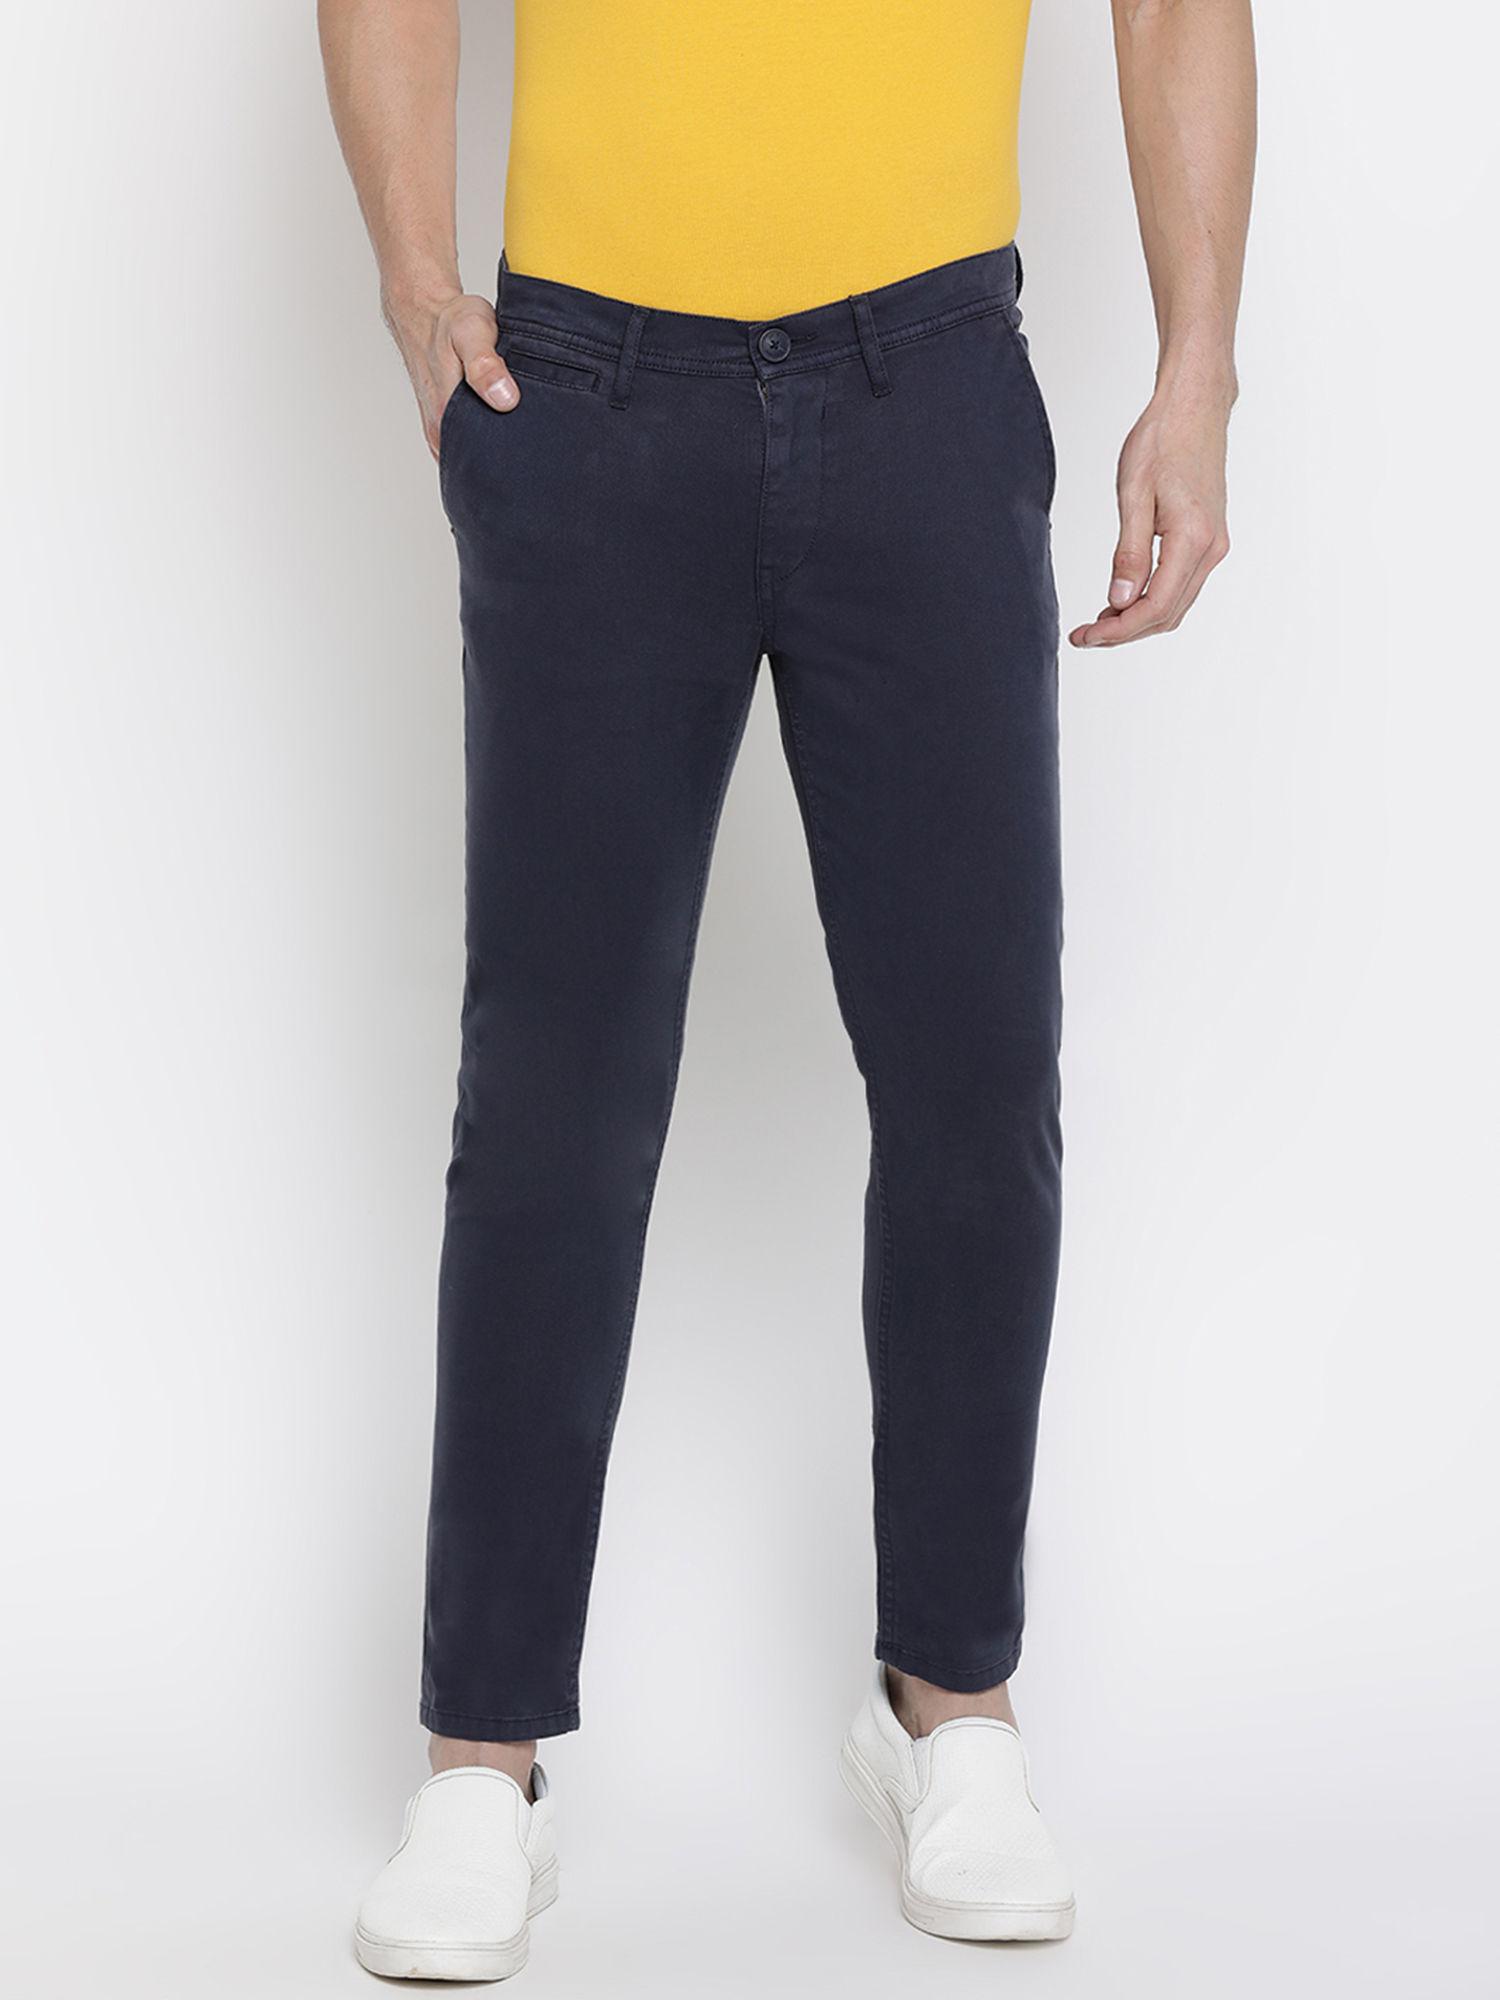 navy-solid-trouser